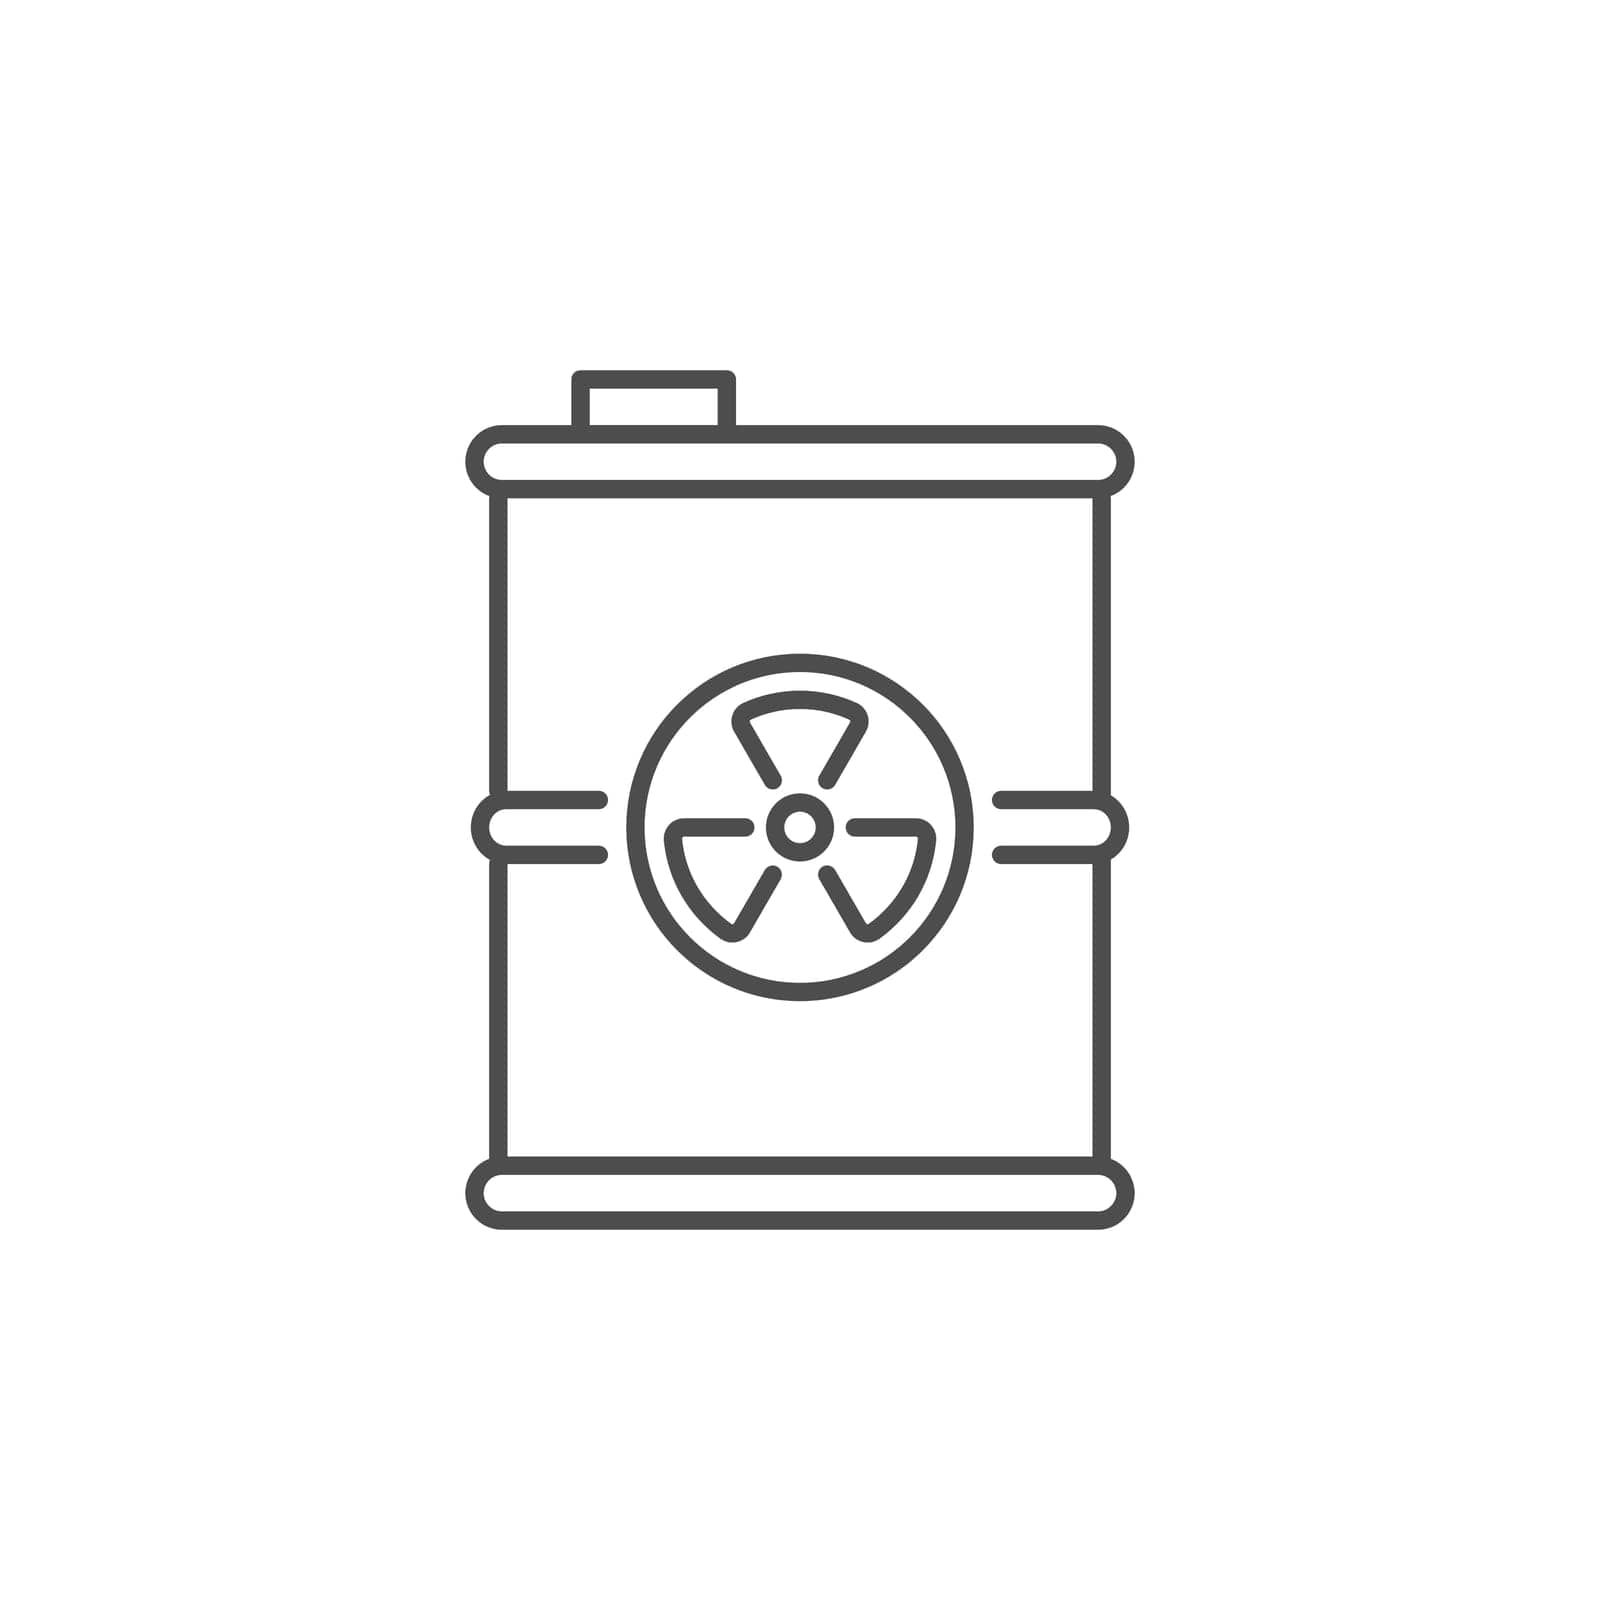 Toxic barrel related vector linear icon by smoki